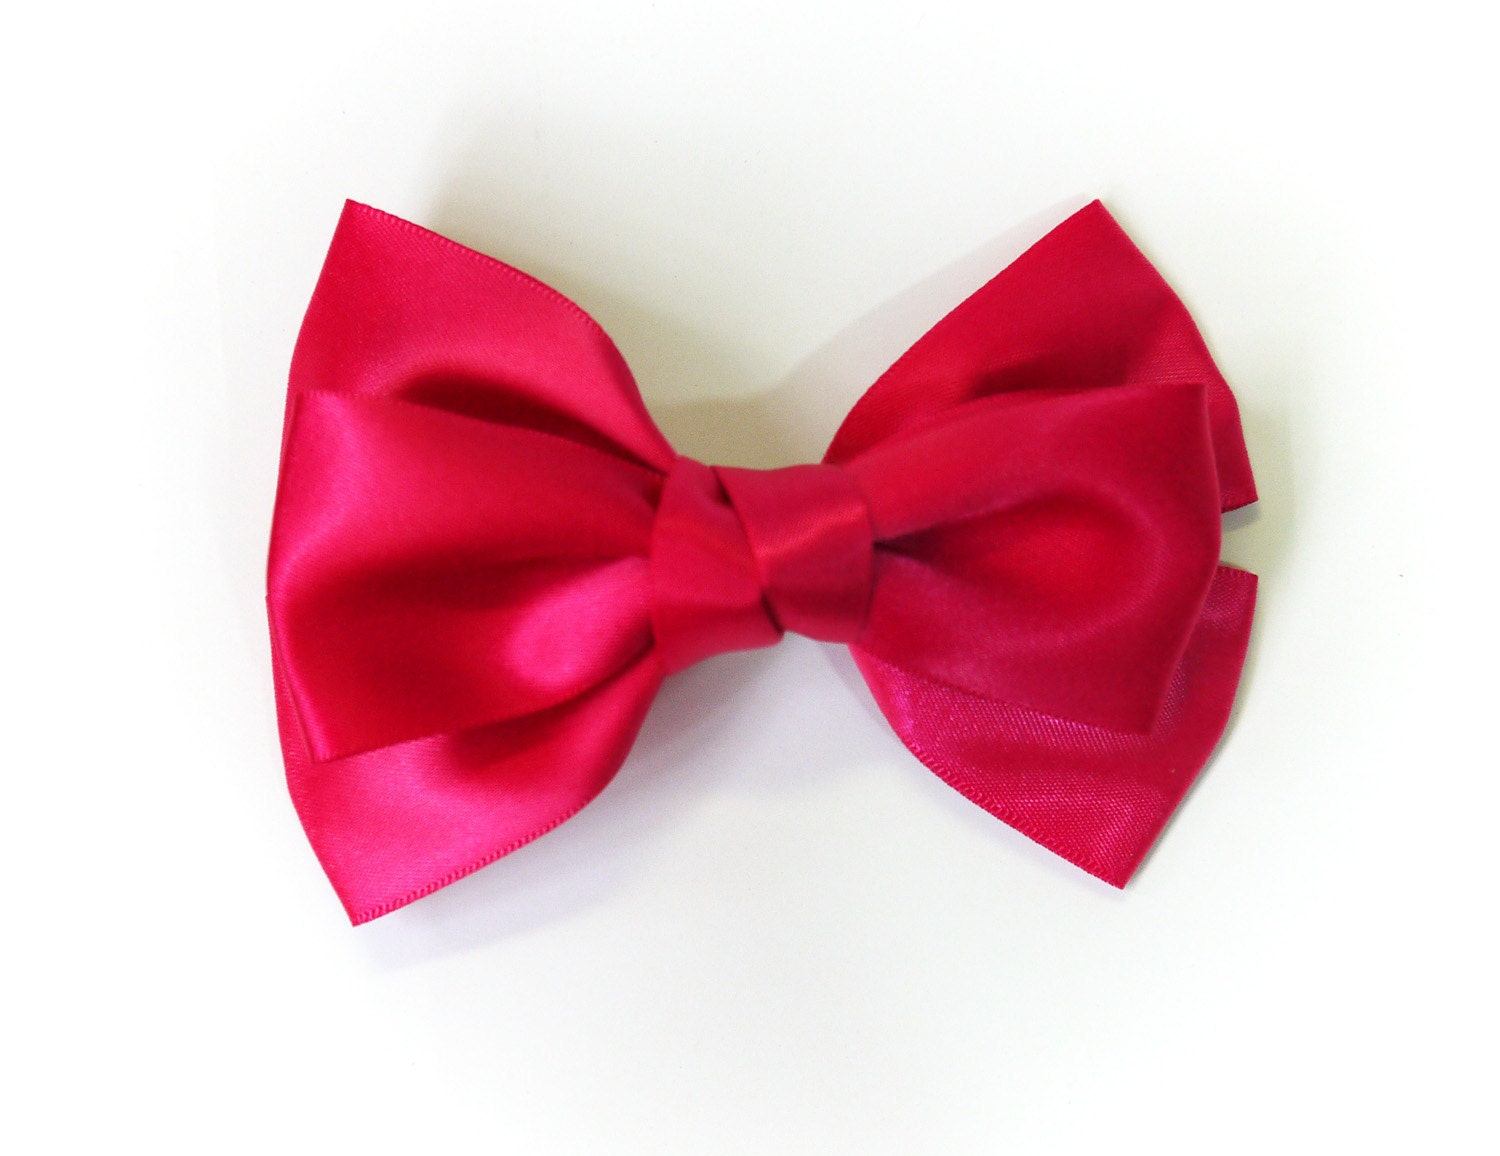 SALE 50% OFF Large Shocking Pink Satin Ribbon Bow Hair by lintoon